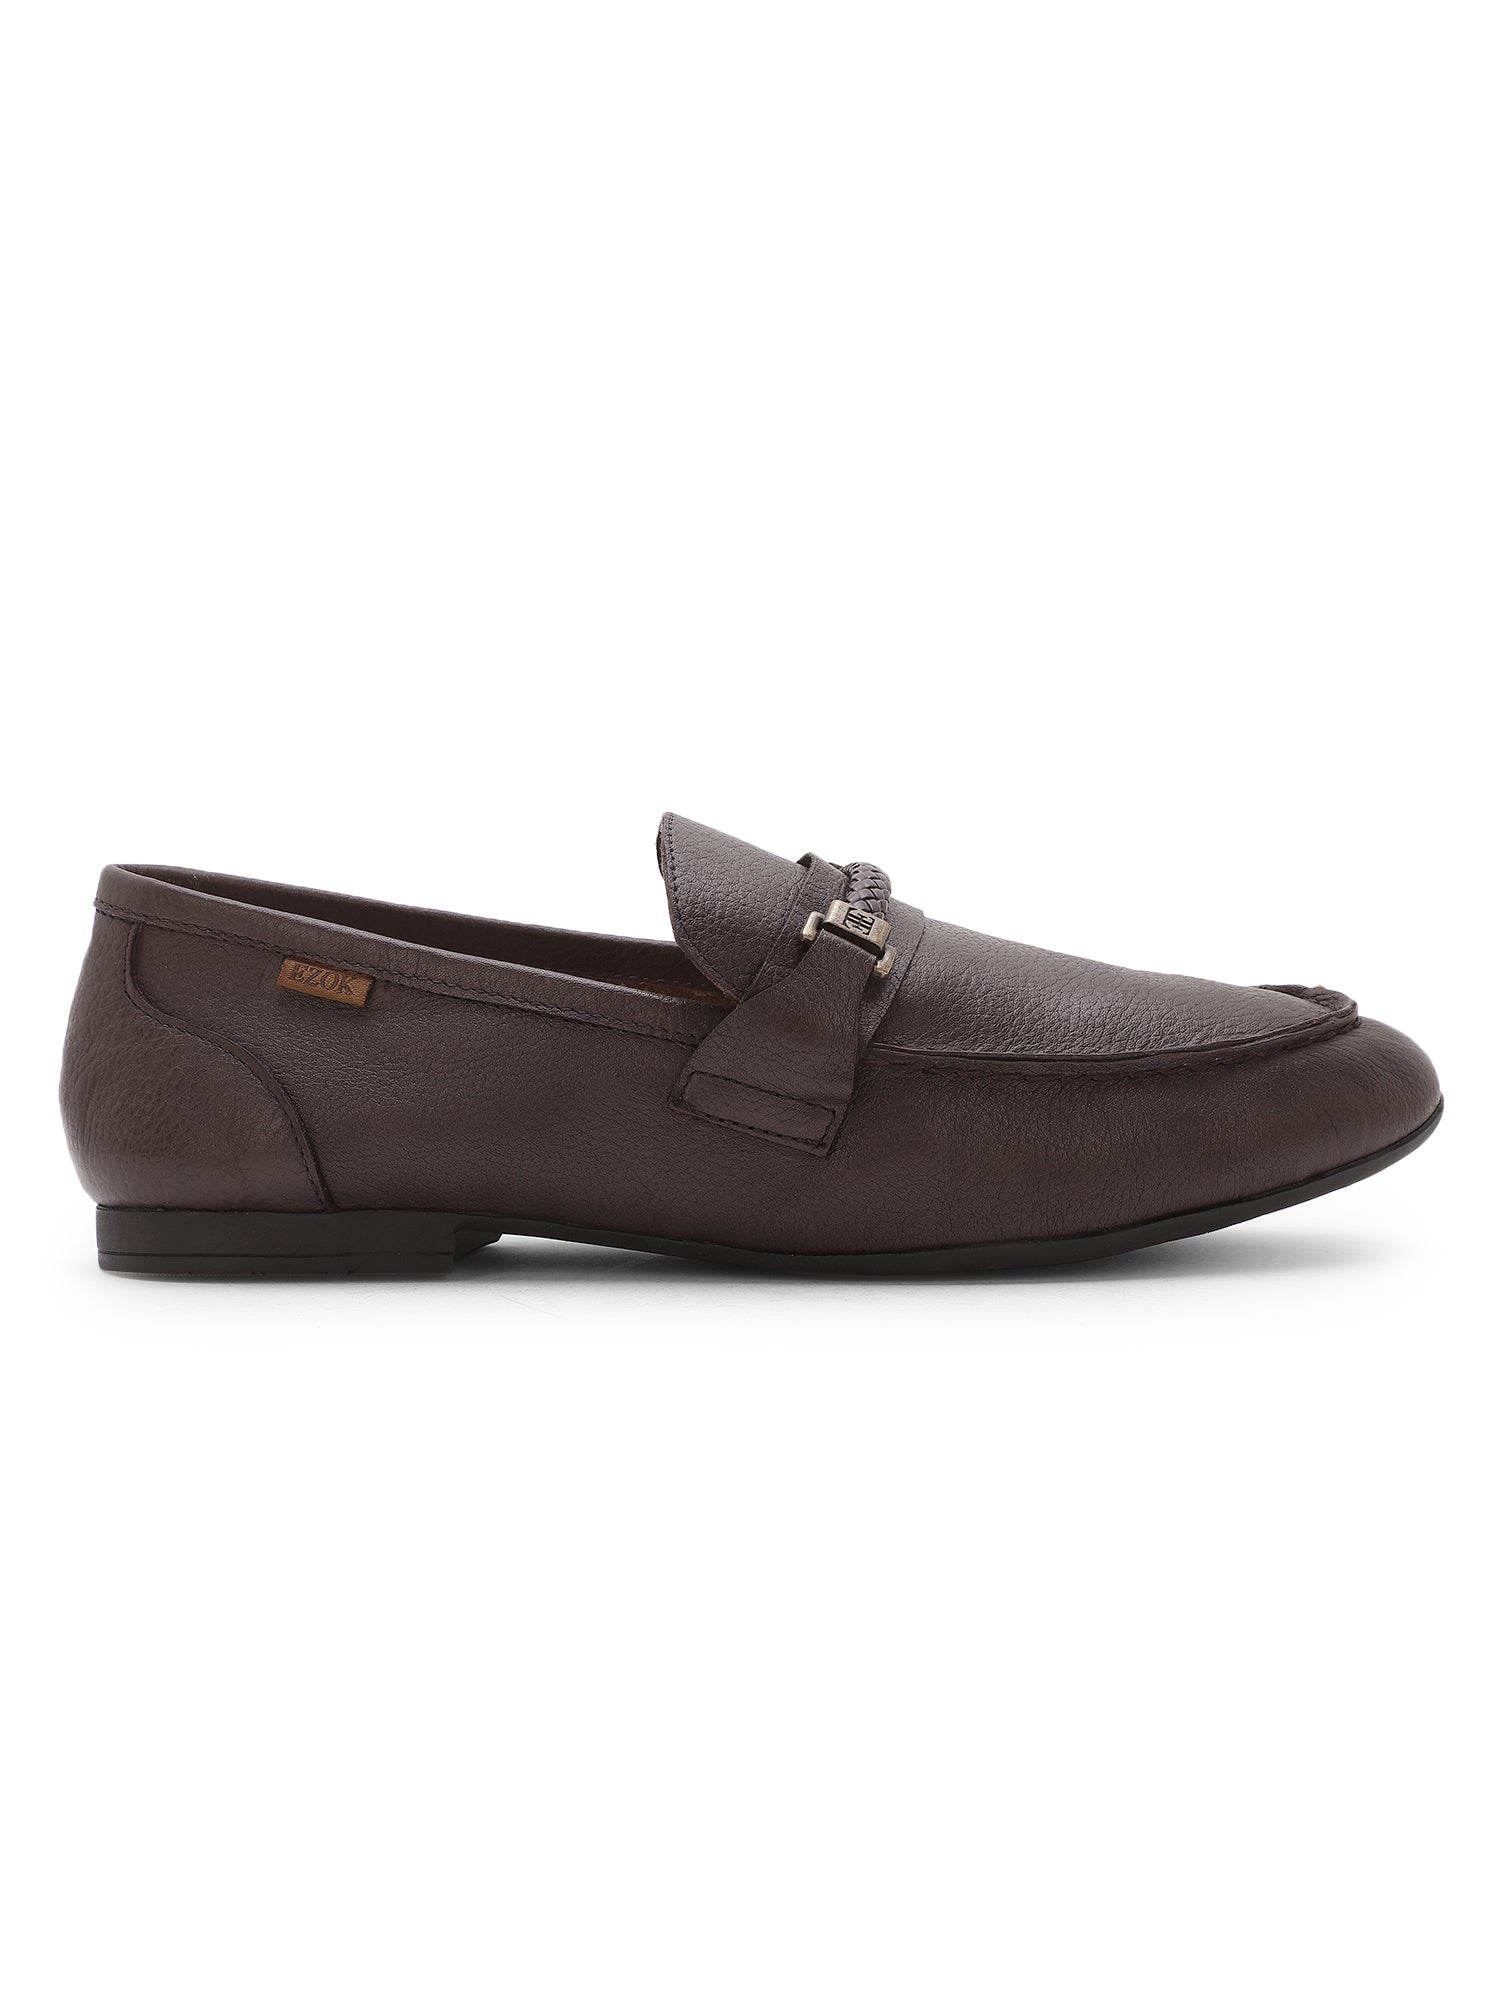 Ezok Shoes Mens Brown Leather Moccasin